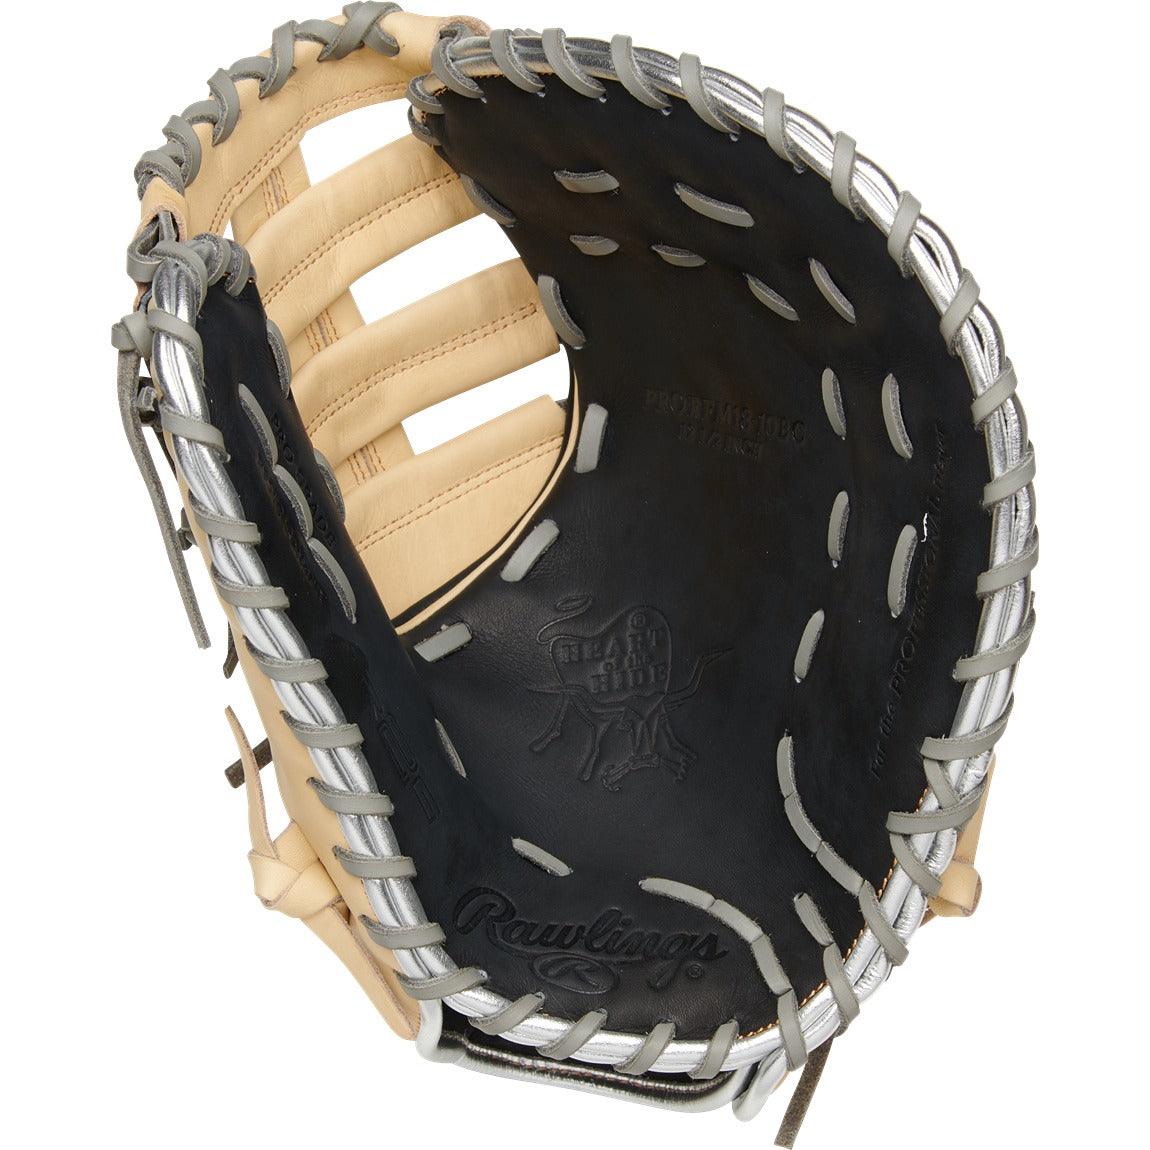 Heart Of The Hide 12.5" R2G Narrow Fit Baseball Glove - Sports Excellence